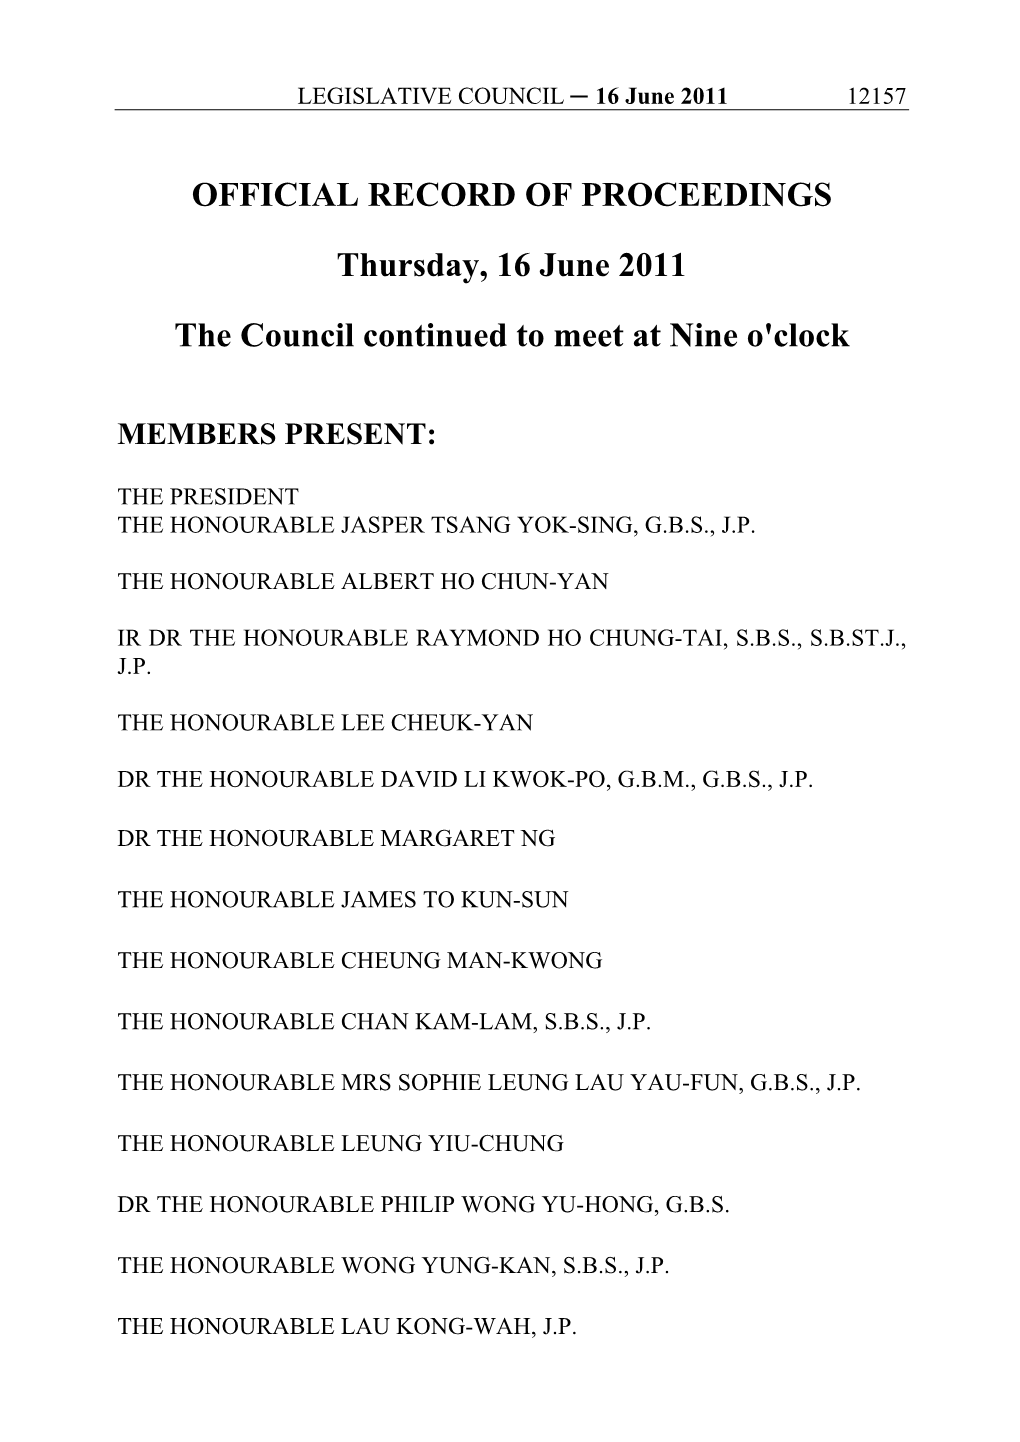 OFFICIAL RECORD of PROCEEDINGS Thursday, 16 June